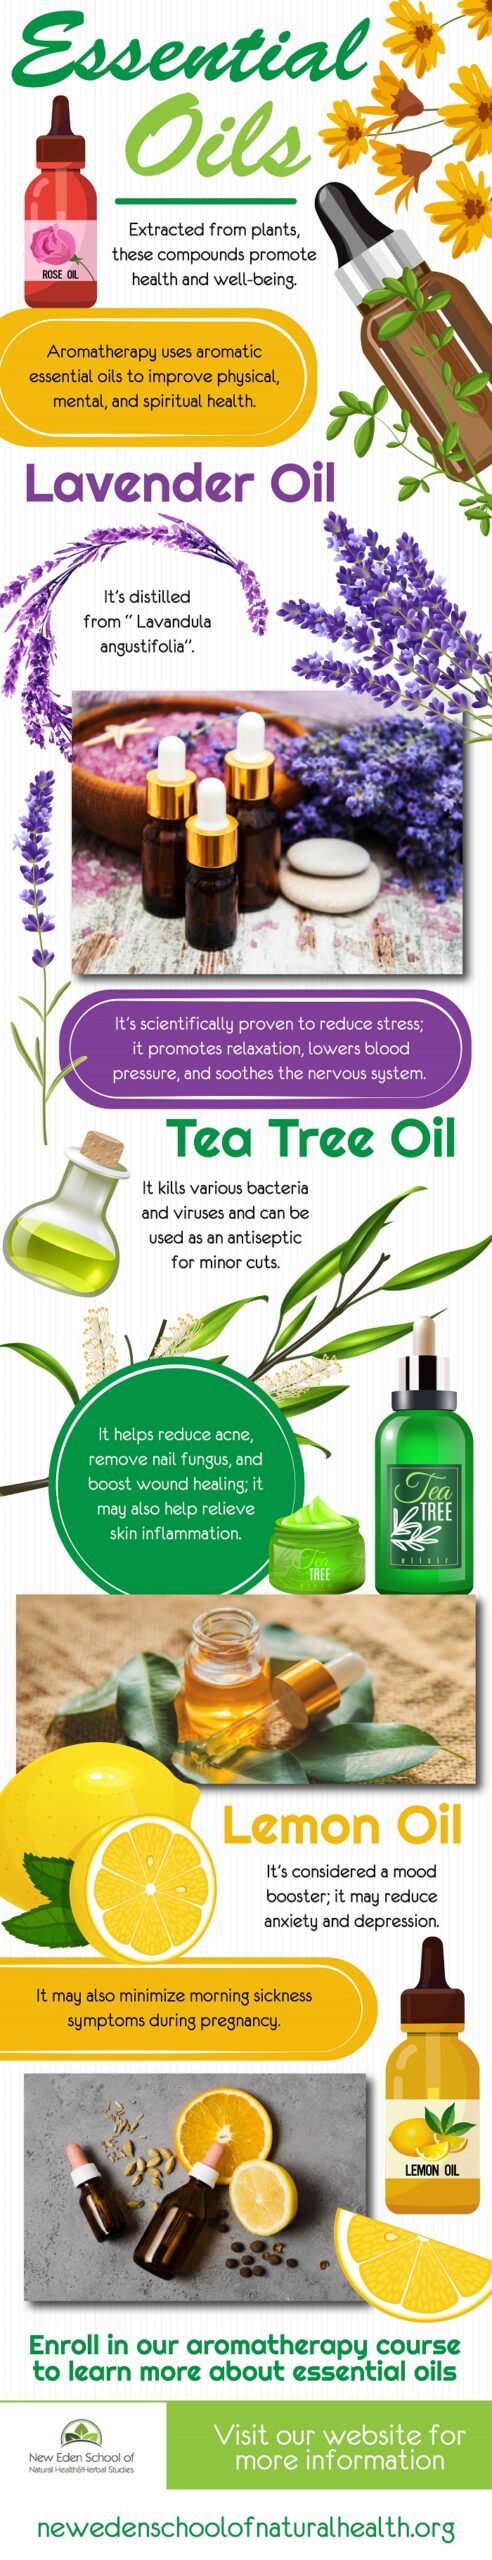 Essential Oils - An Infographic